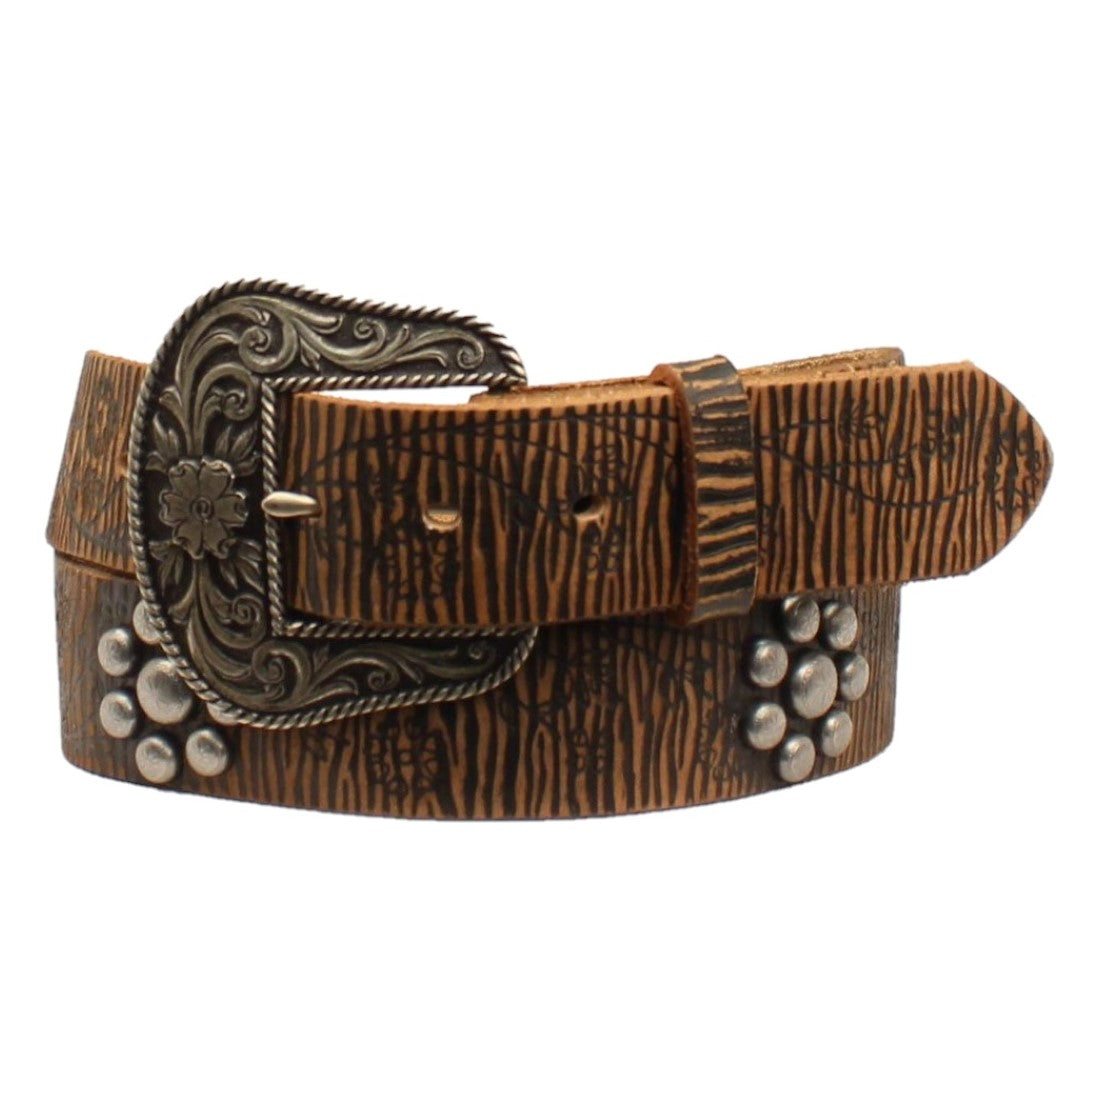 Ariat Ladies Floral Embroidered Floral Studded Brown Belt A1530002